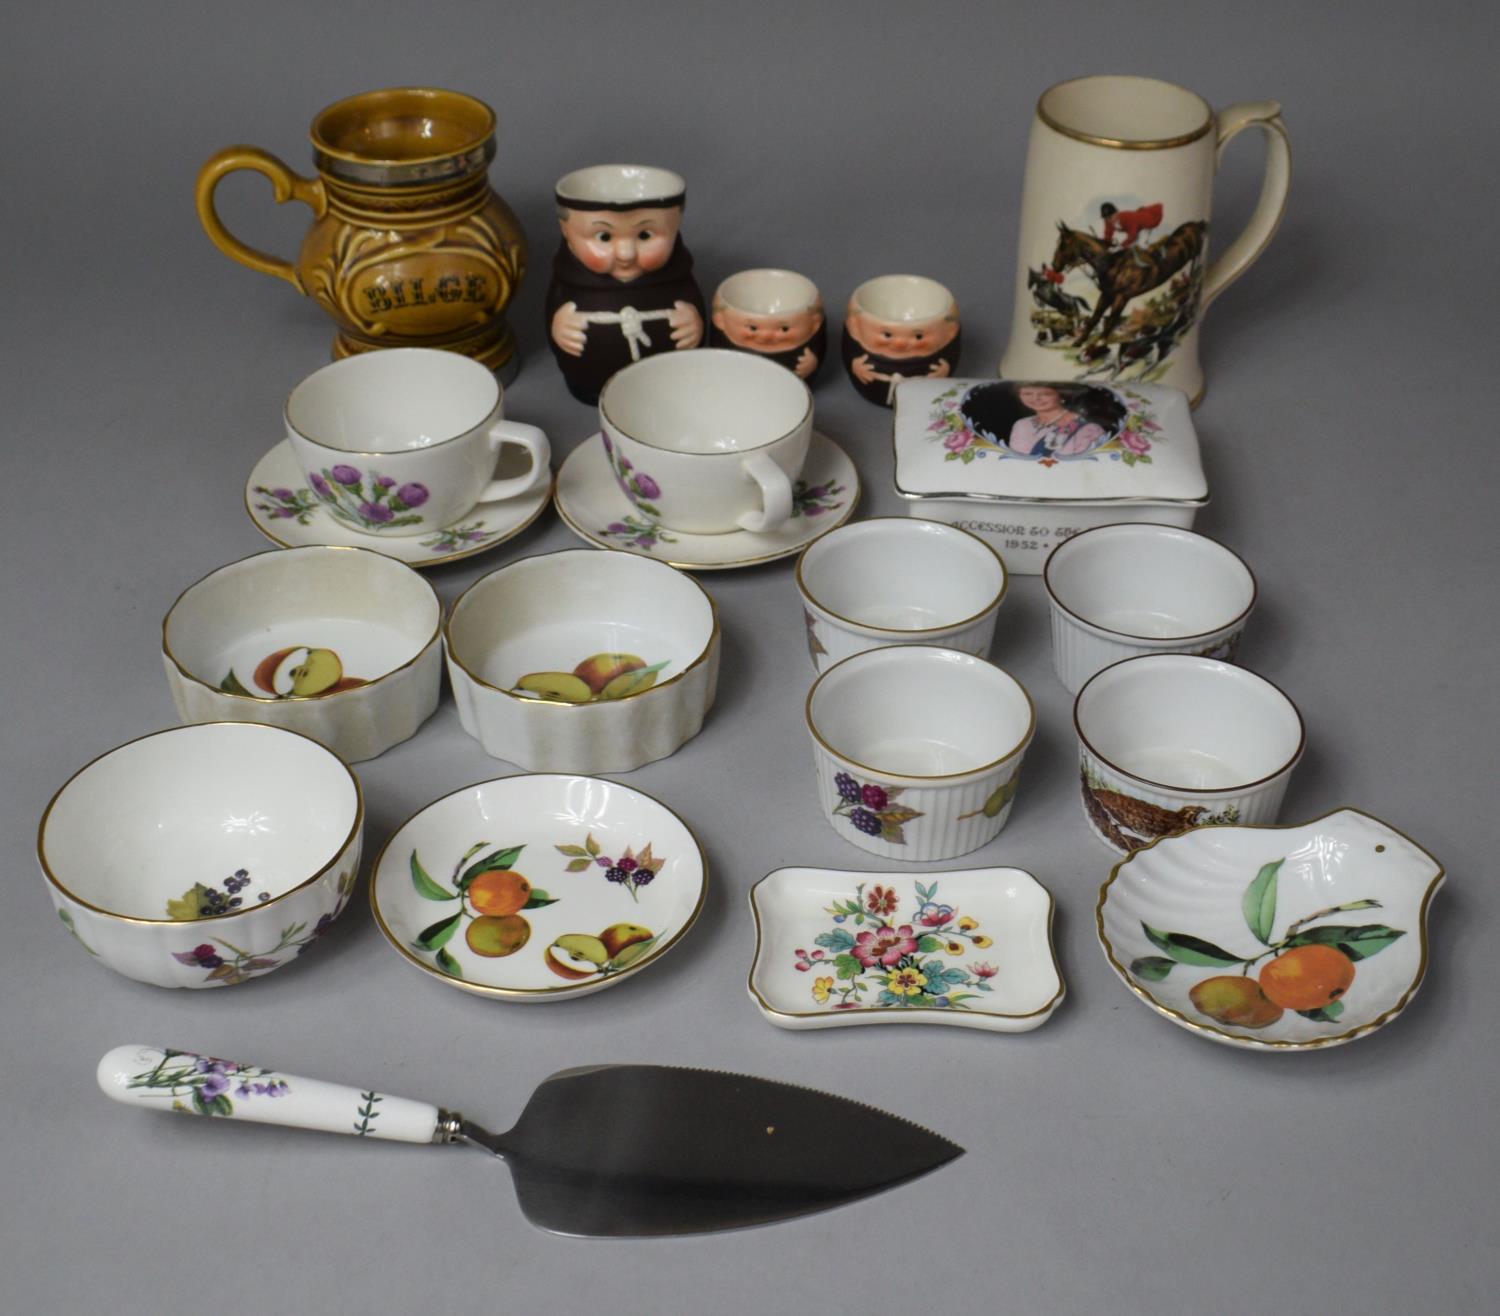 A Collection of Various Ceramics to Include Royal Worcester Ramekins, Bowls, Trinket Dishes etc